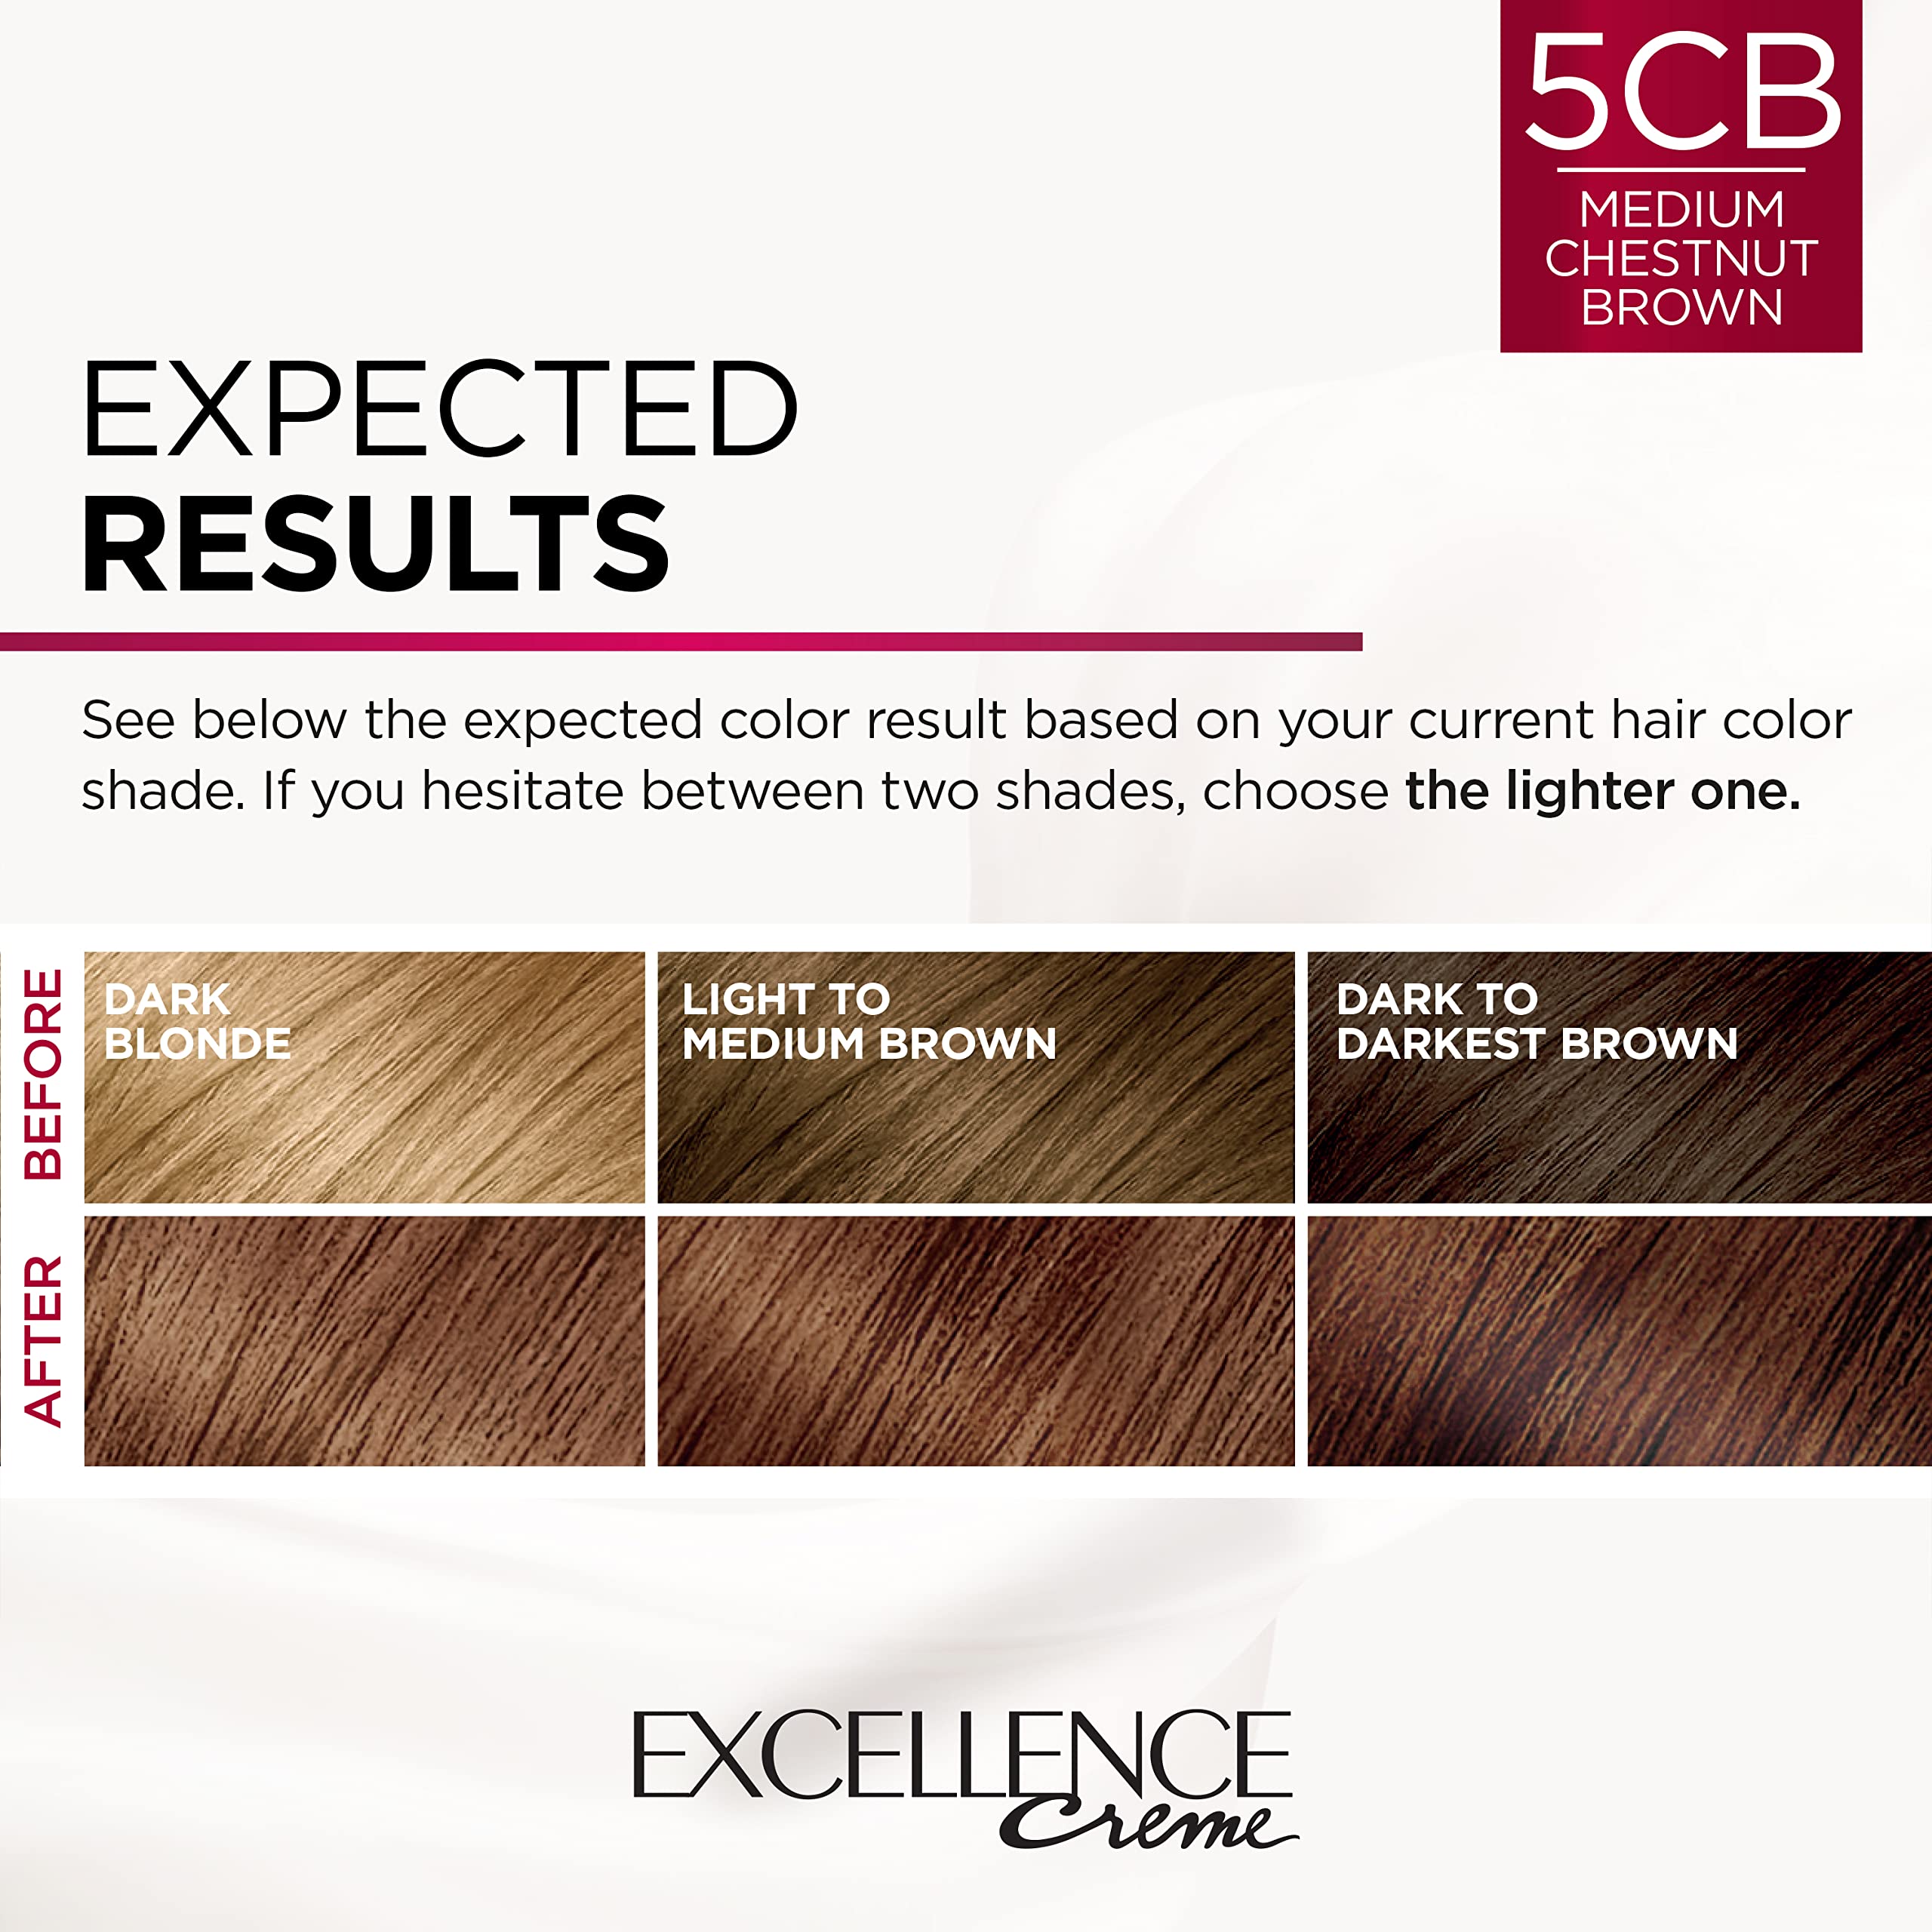 L'Oreal Paris Excellence Creme Permanent Triple Care Hair Color, 5CB Medium Chestnut Brown, Gray Coverage For Up to 8 Weeks, All Hair Types, Pack of 1